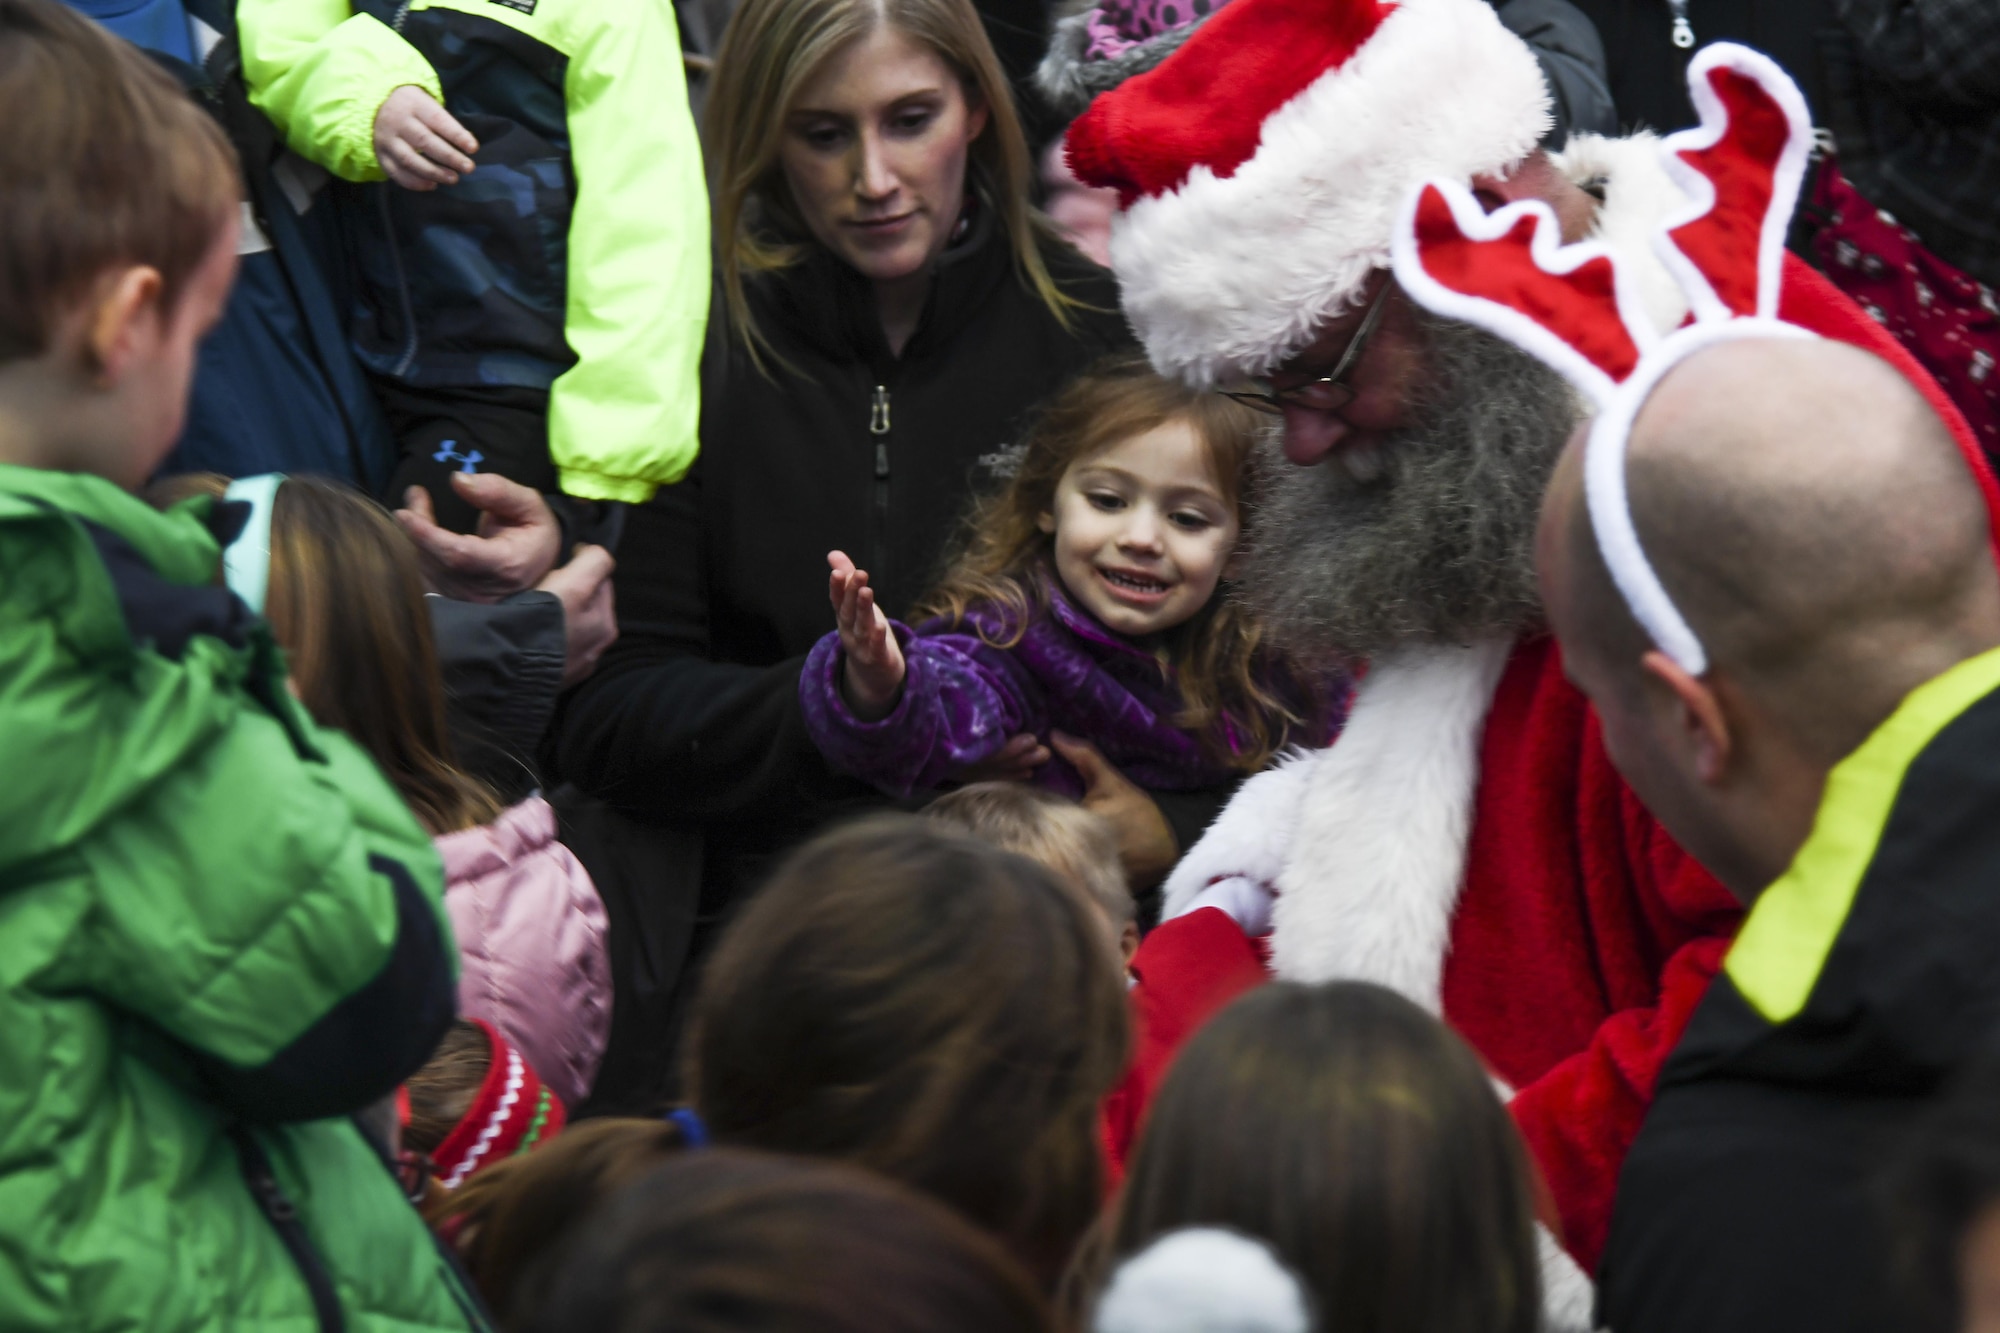 Santa Claus passes out candy to children during the Christmas tree lighting ceremony at Osan Air Base, Republic of Korea, Dec. 8, 2016. Osan children sang Christmas carols before Santa appeared, riding on a fire engine. (U.S. Air Force by Tech. Sgt. Rasheen Douglas)